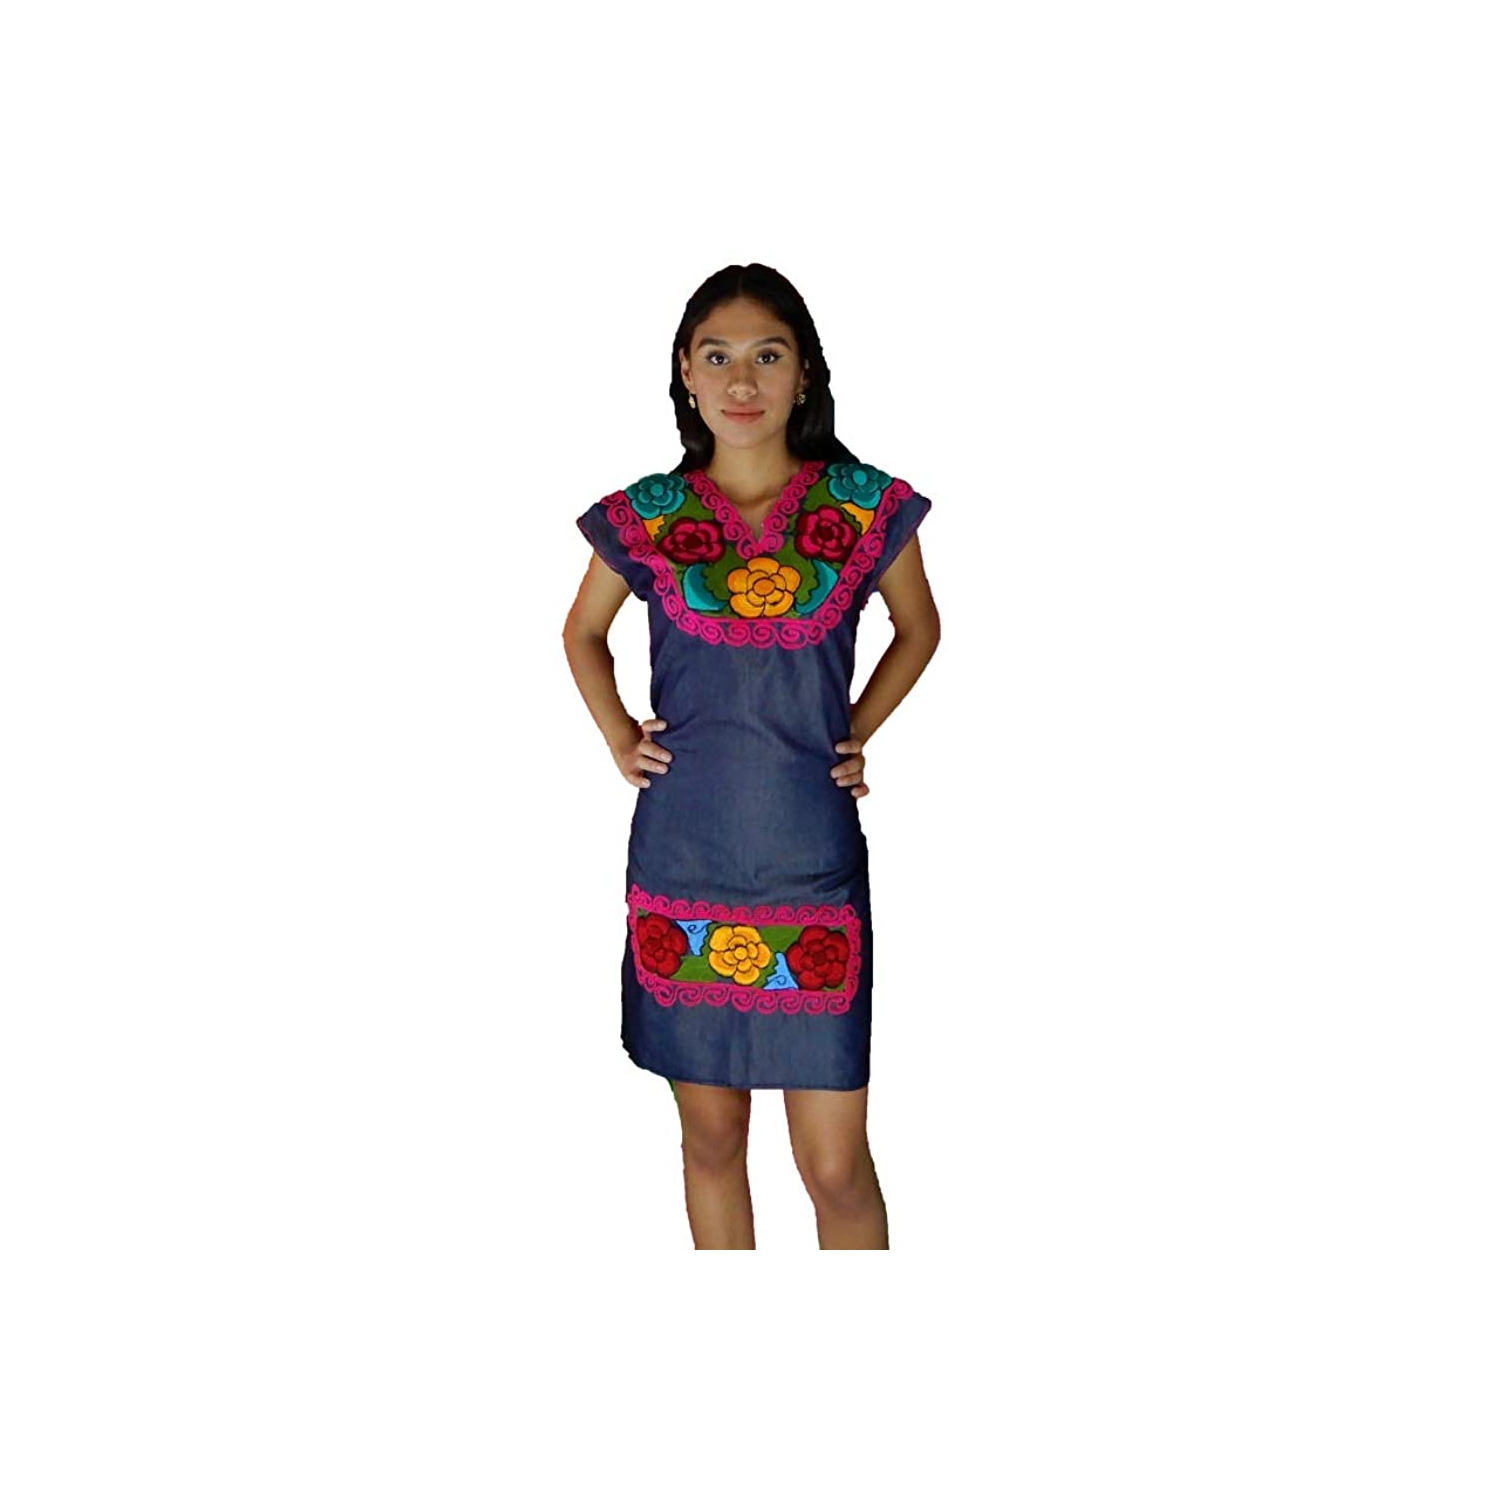 Mexican Womans Dress Jean Size Small -Medium Tunic Mexican Hobo Hippie Flower*** SIZE = xlarge